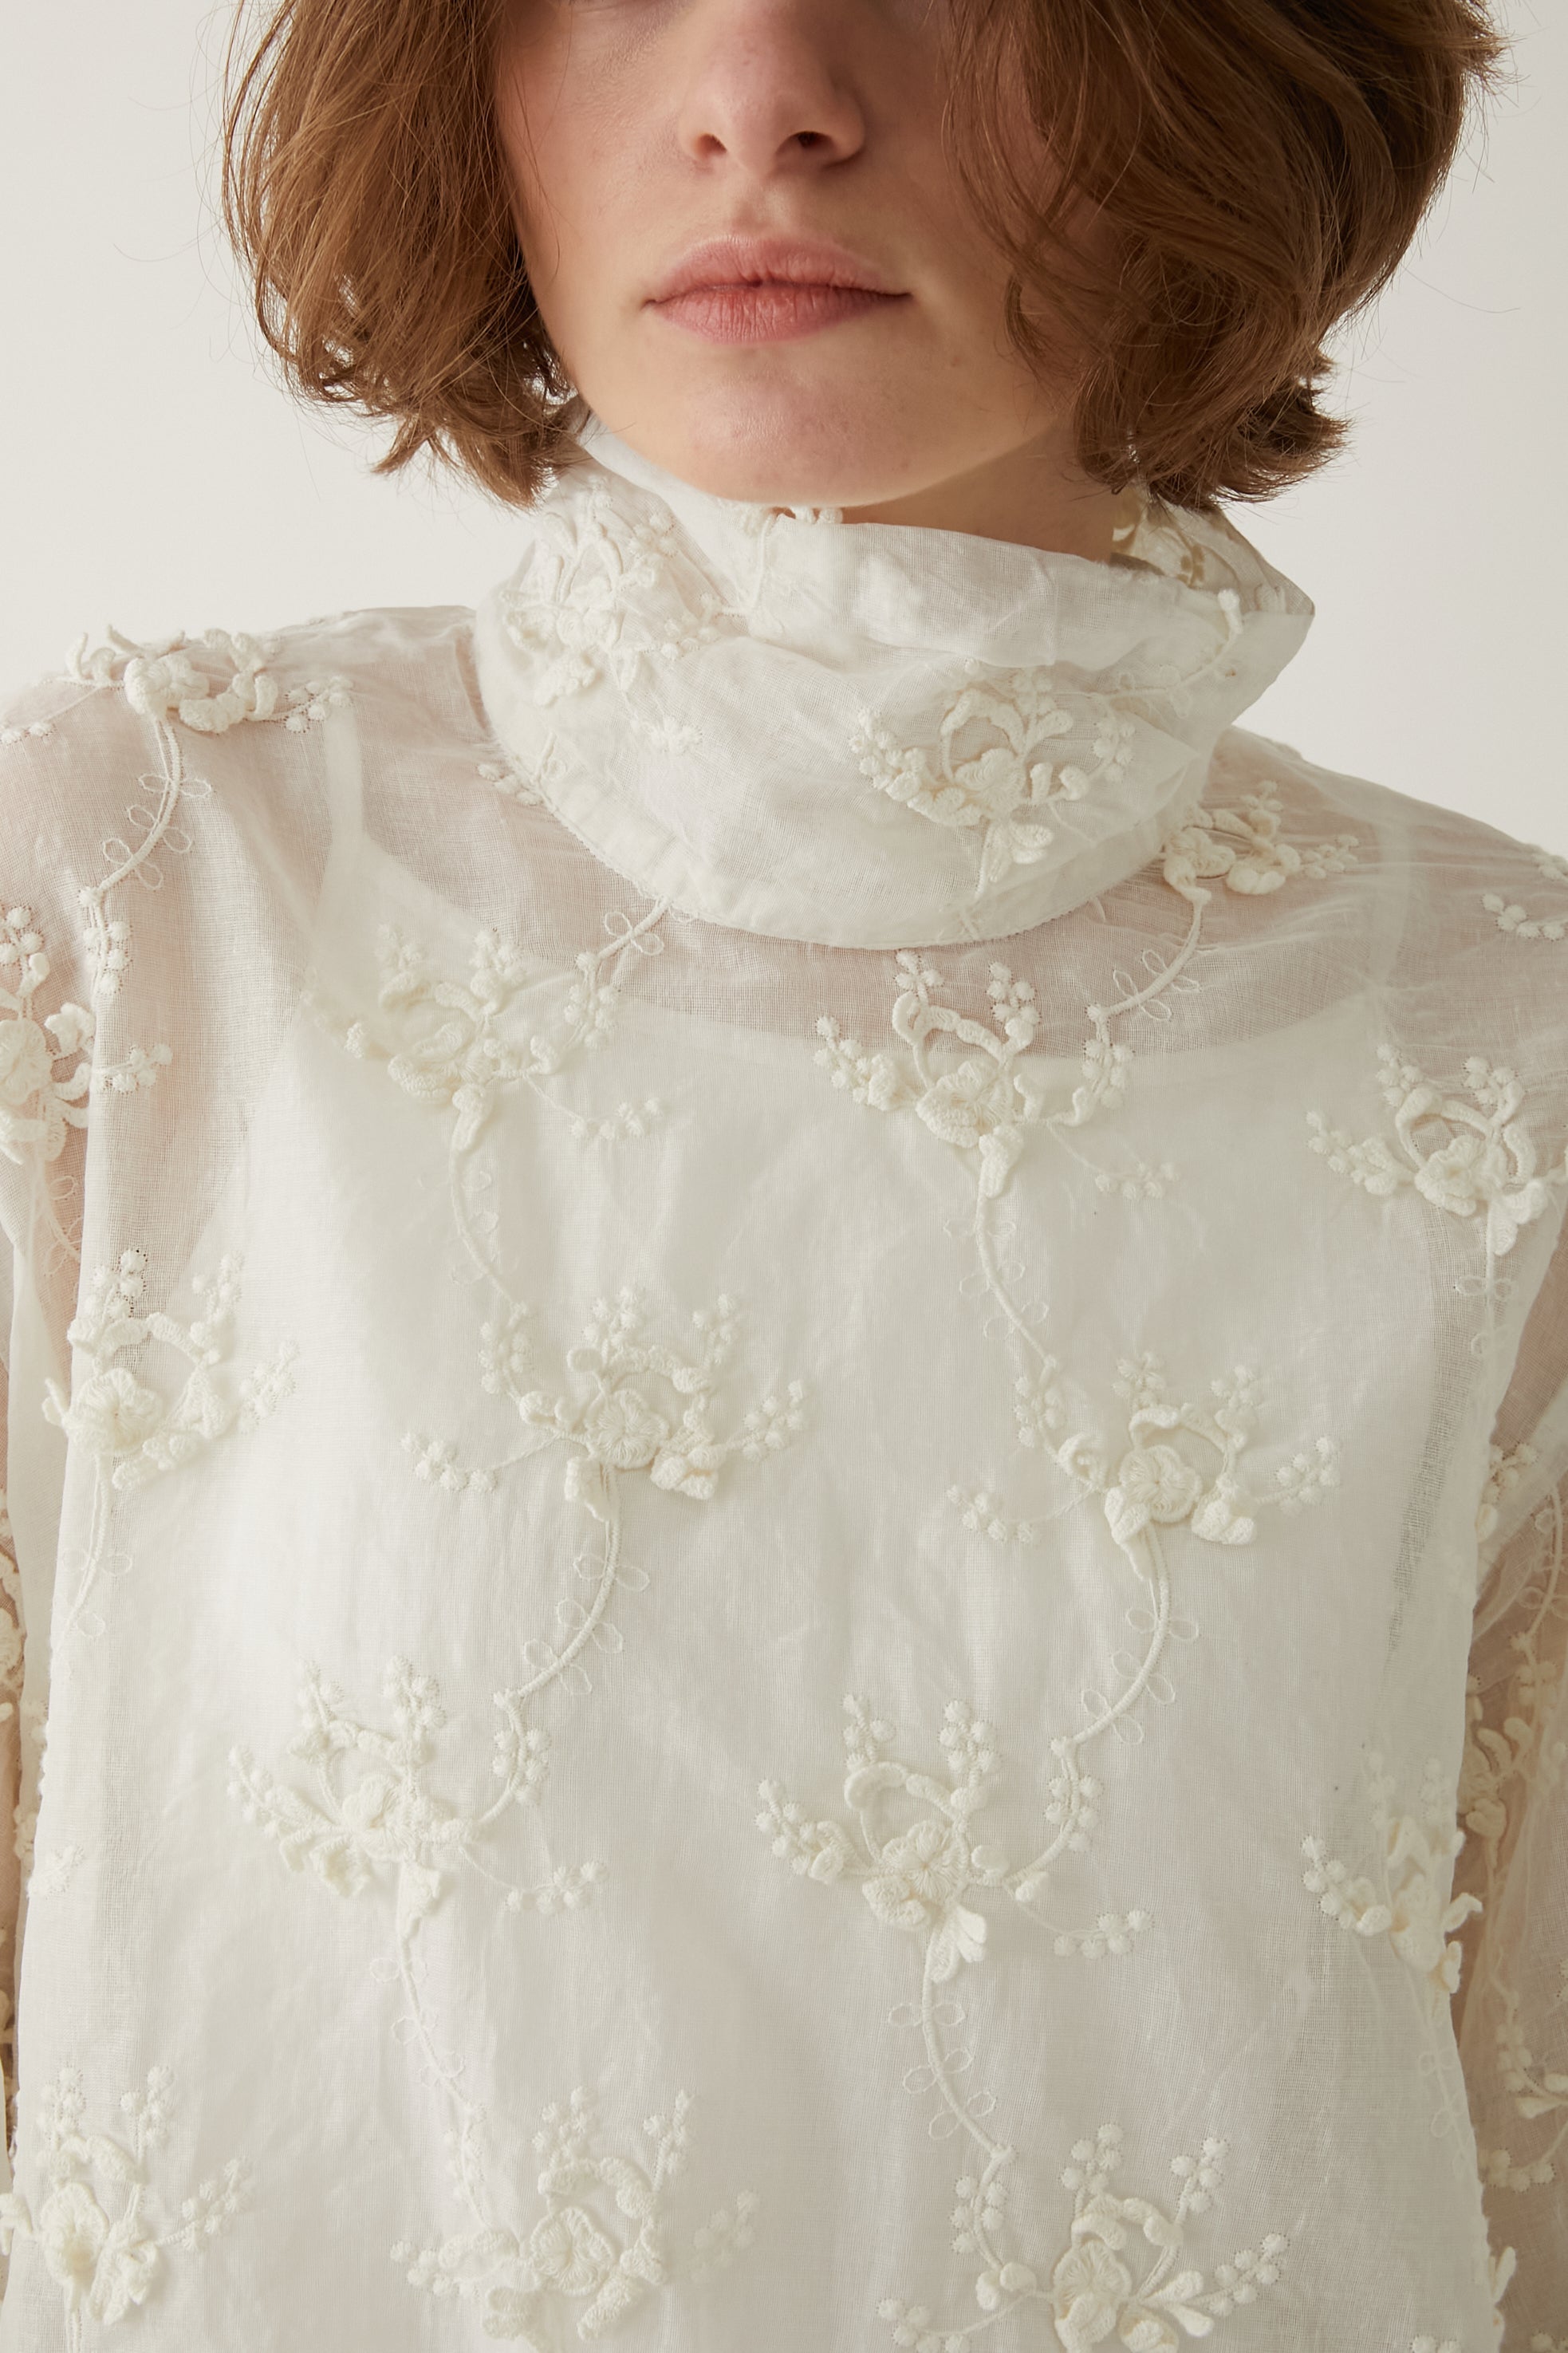 3D embroidery long blouse │ WHITE